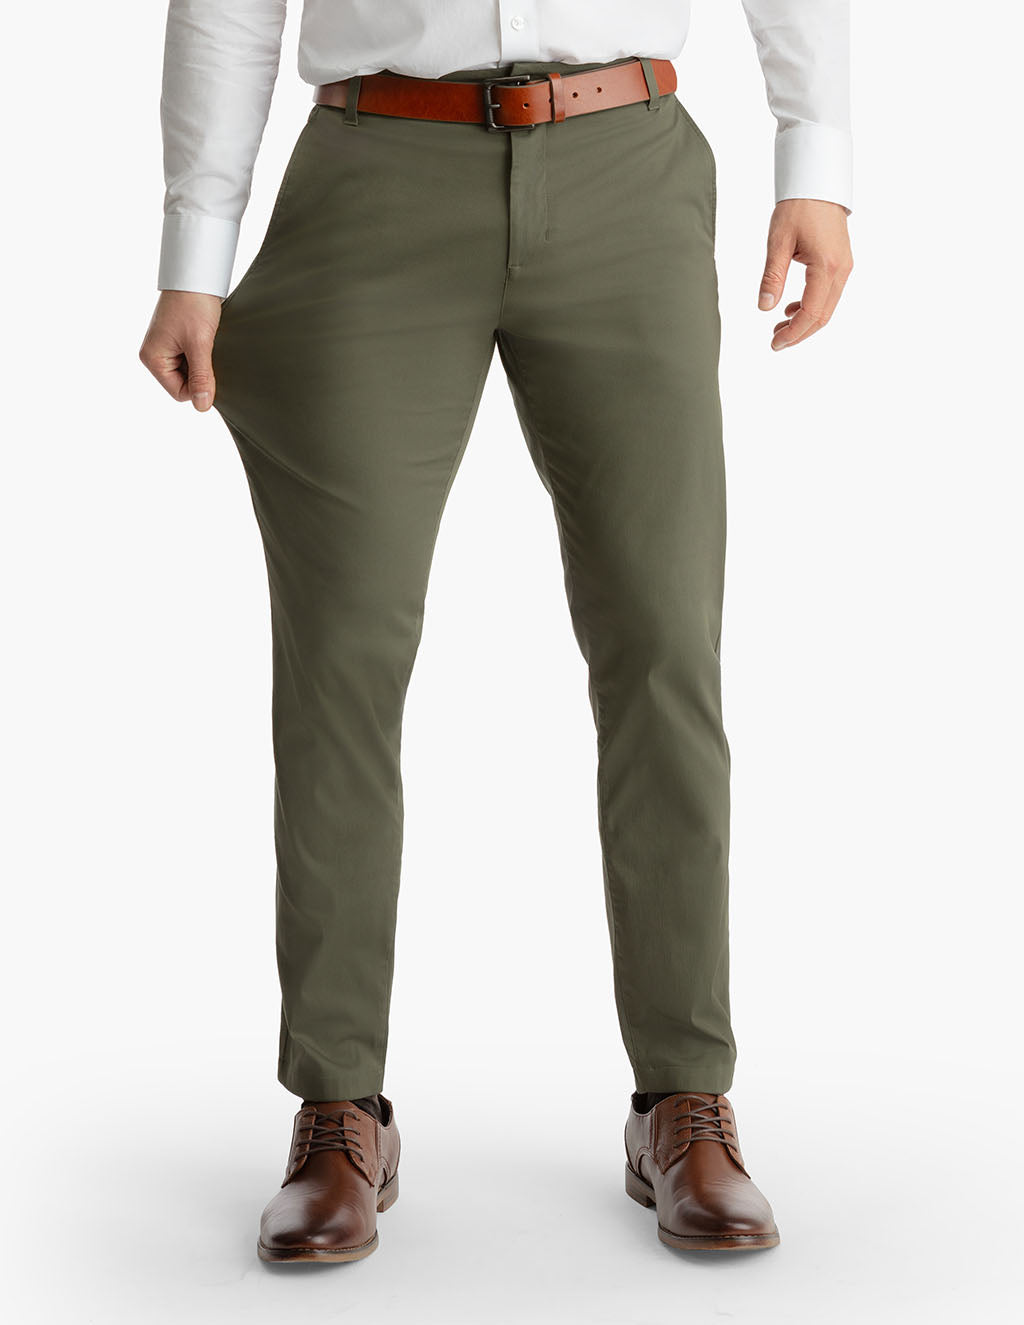 Appealing khaki pants for school uniforms For Comfort And Identity 